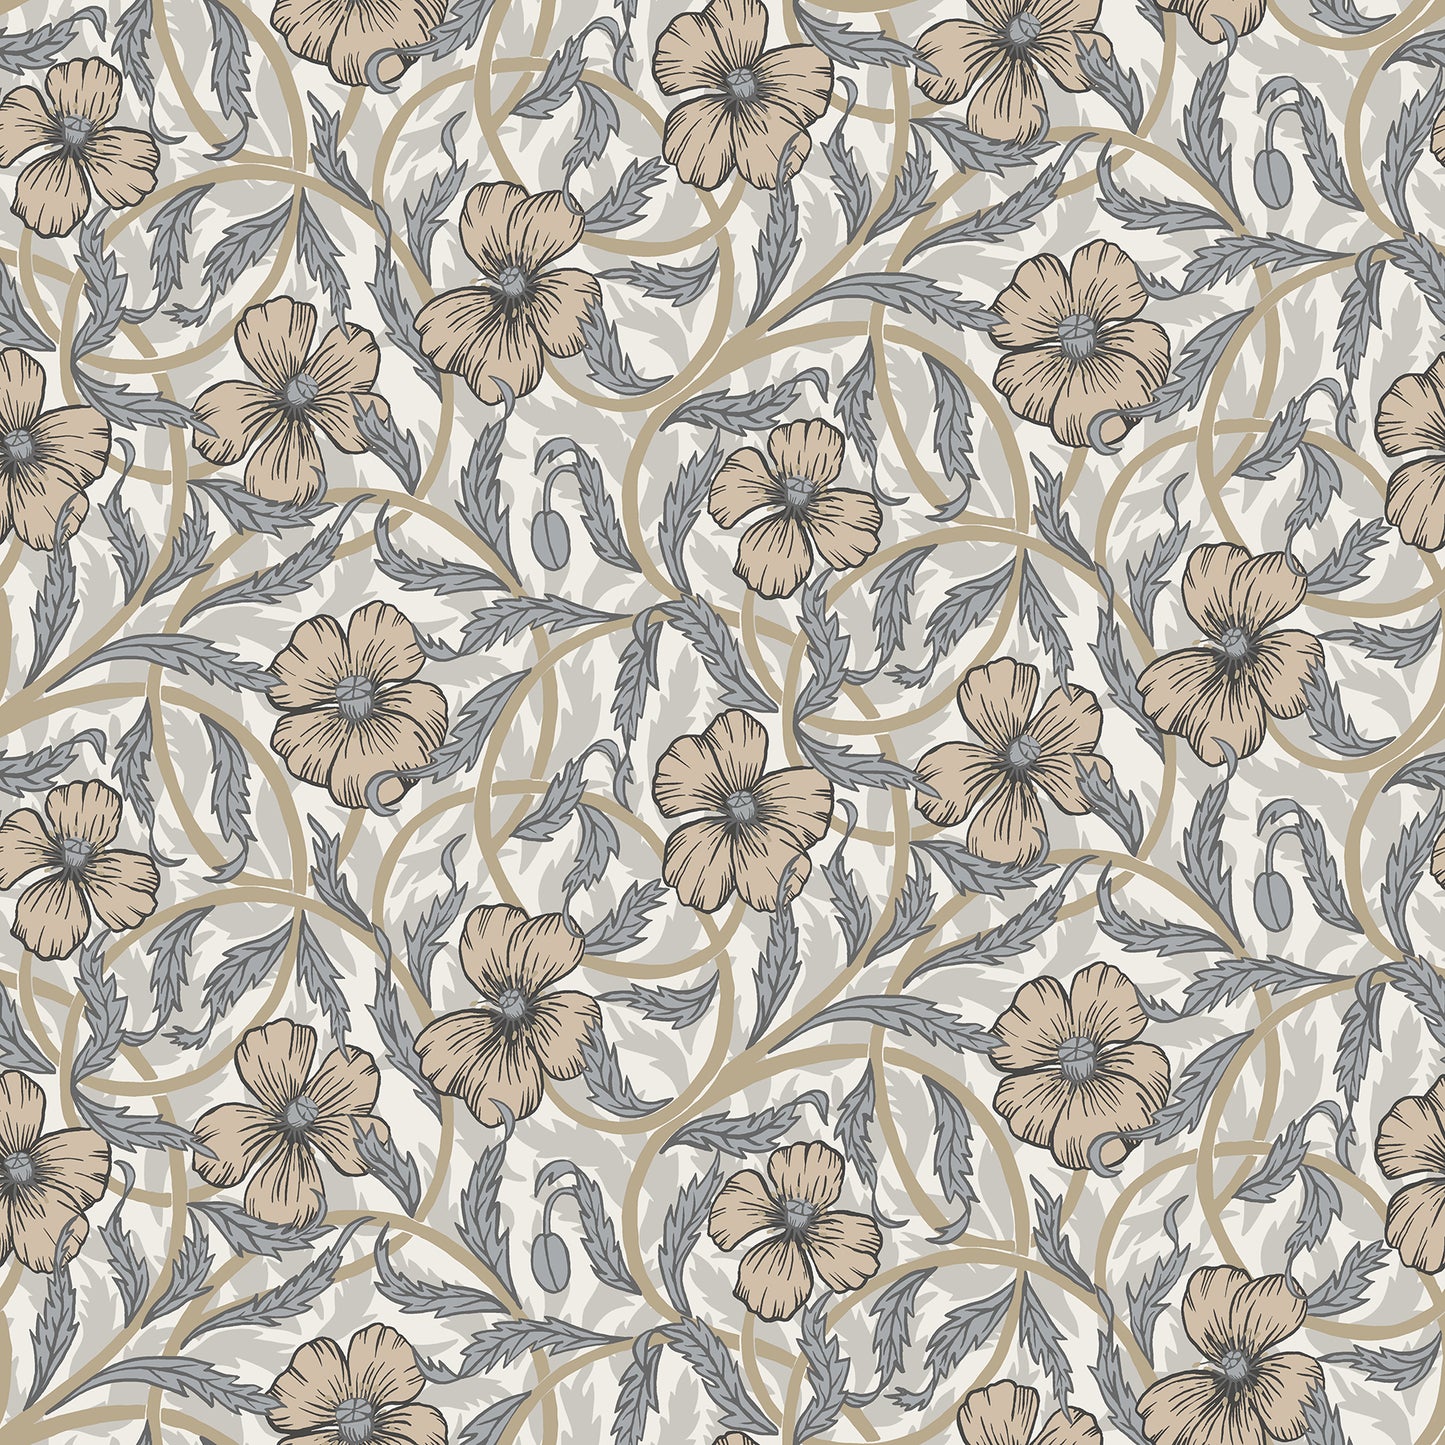 Looking for 2948-28025 Spring Imogen Neutral Floral Neutral A-Street Prints Wallpaper